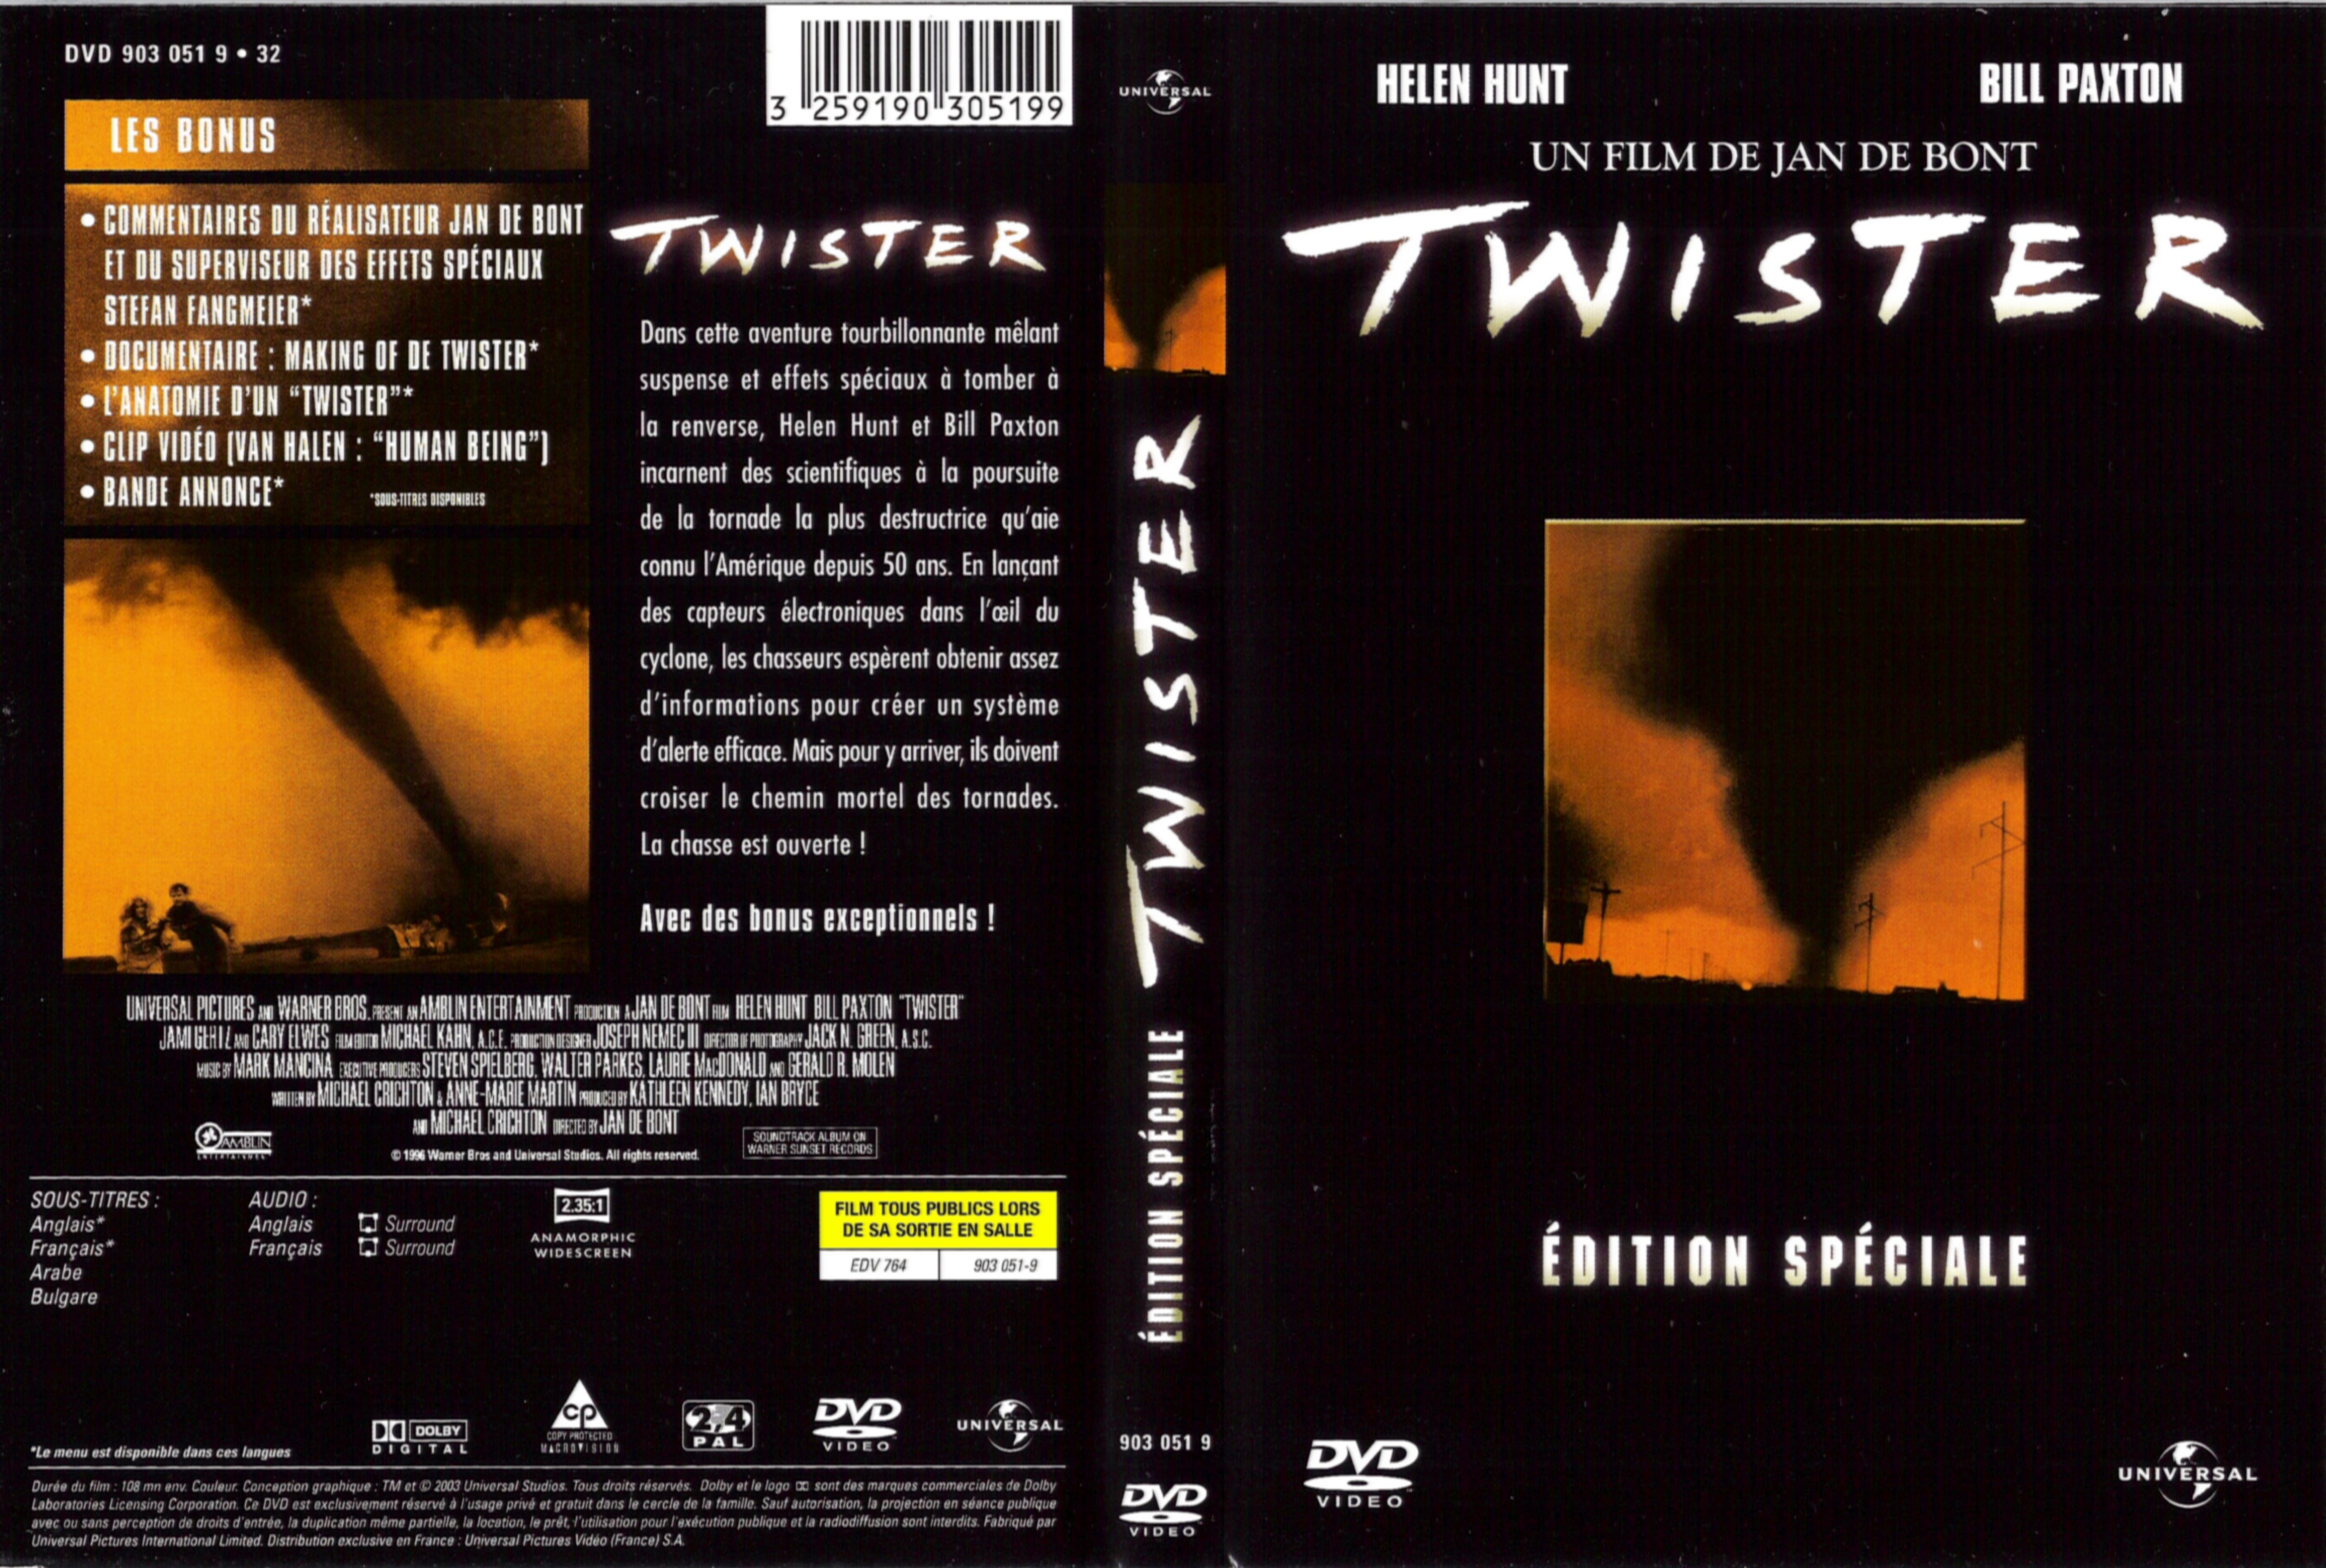 Jaquette DVD Twister